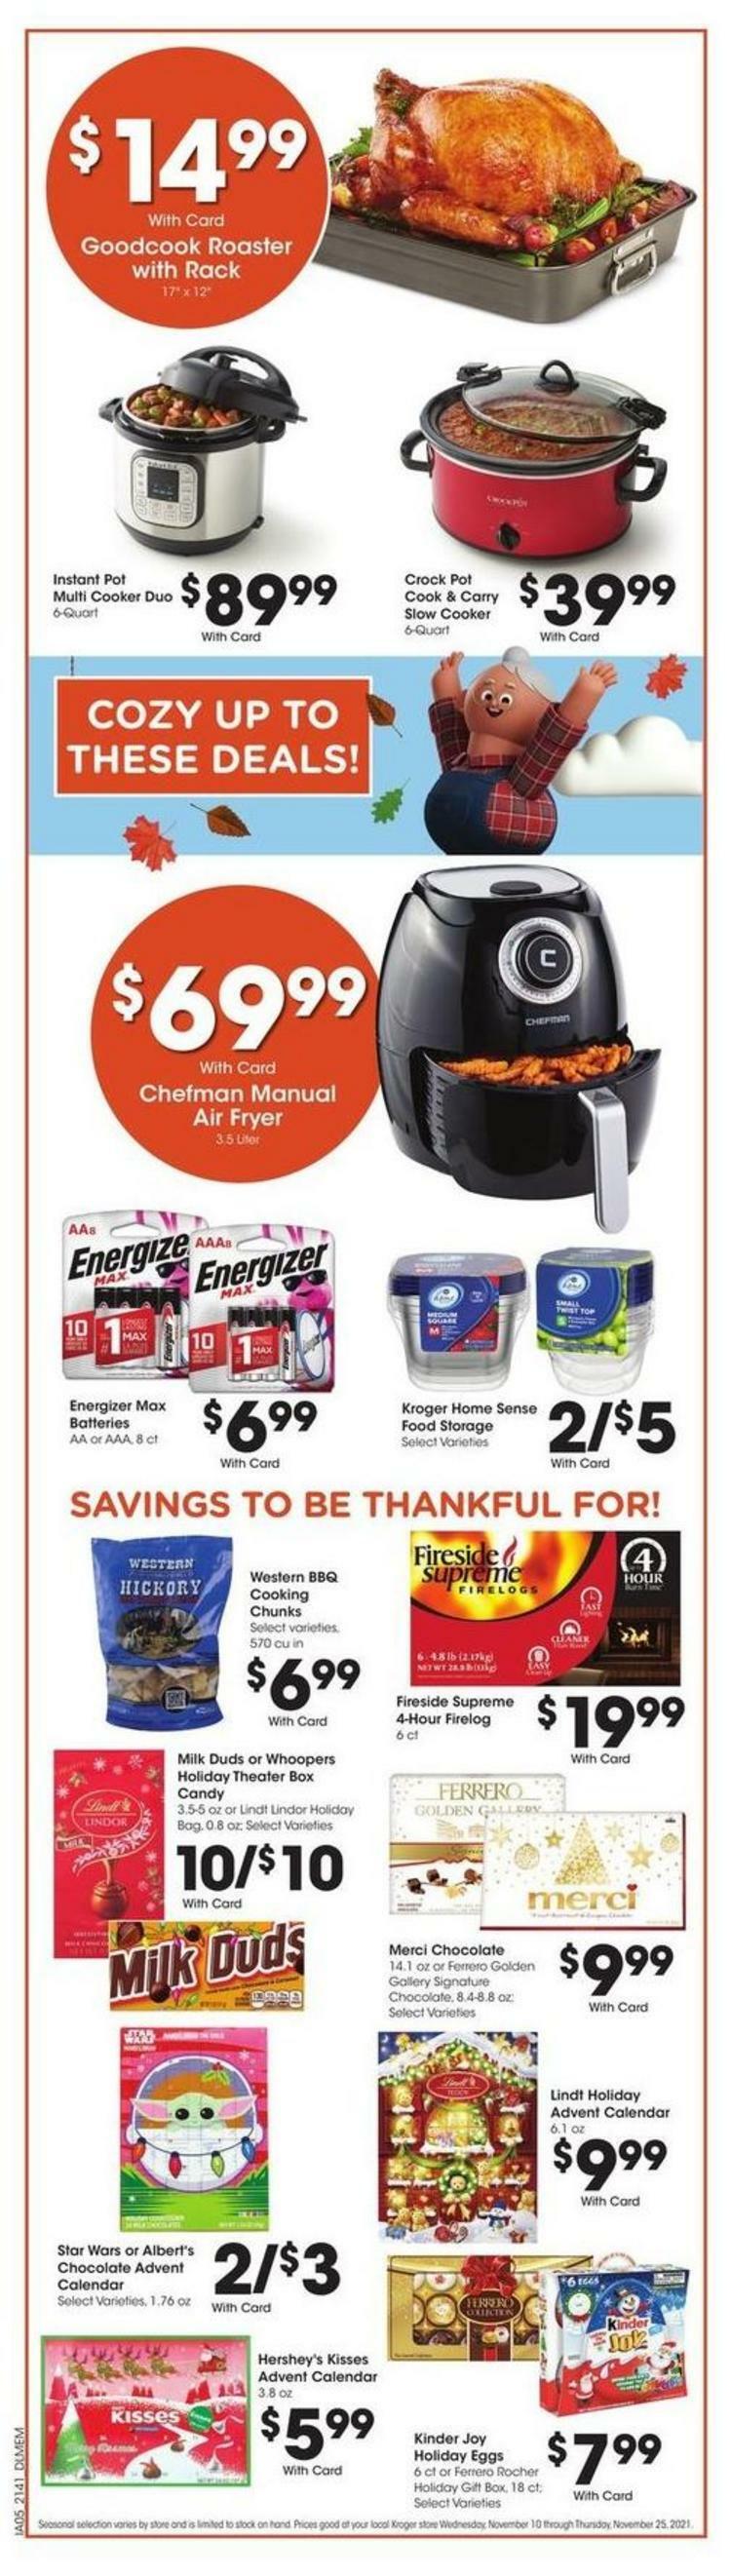 Kroger Weekly Ad from November 17